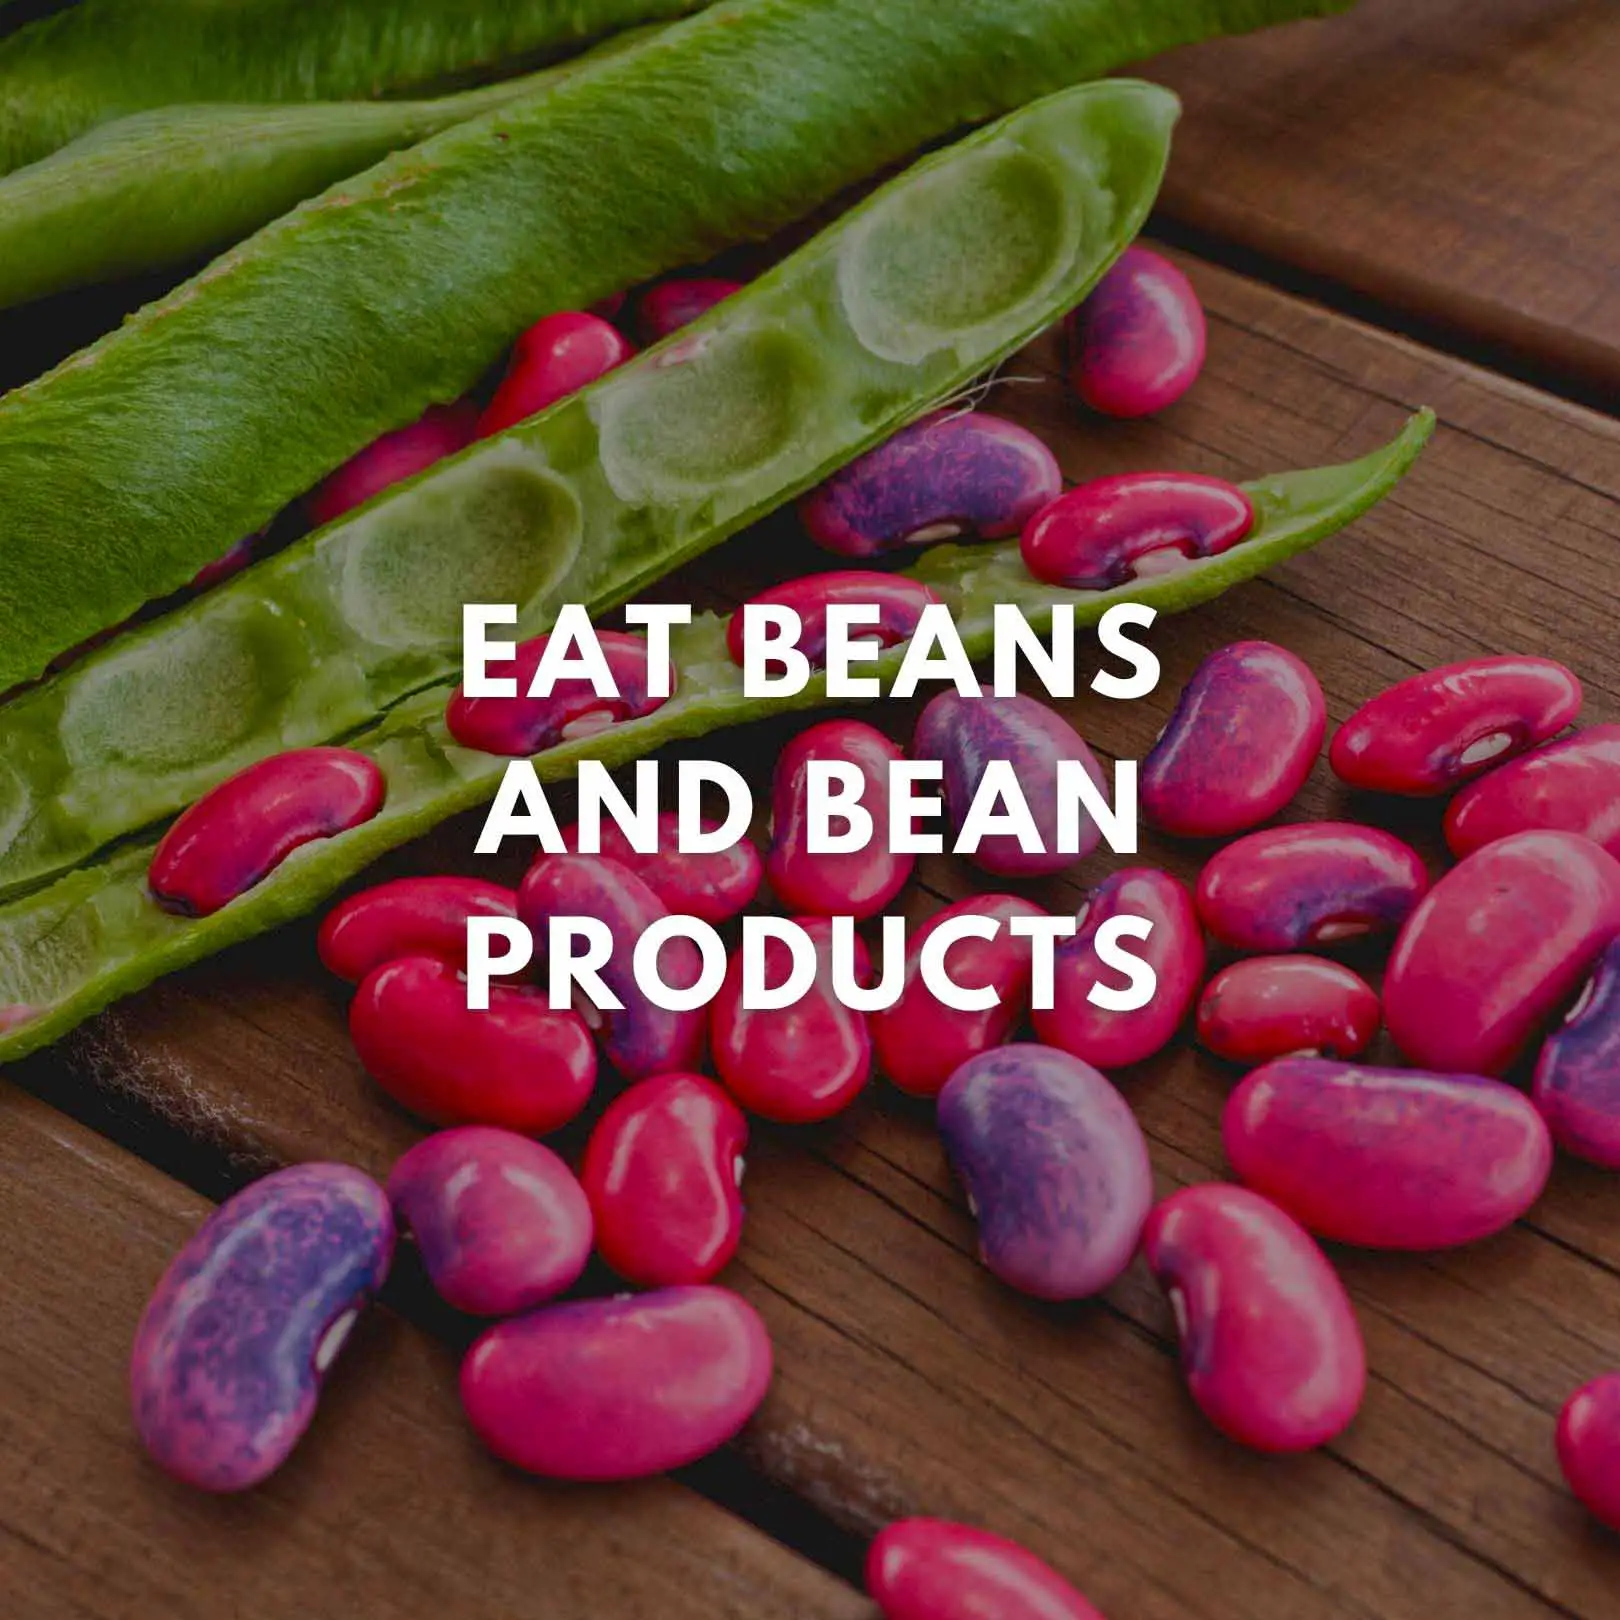 Eat beans and bean products